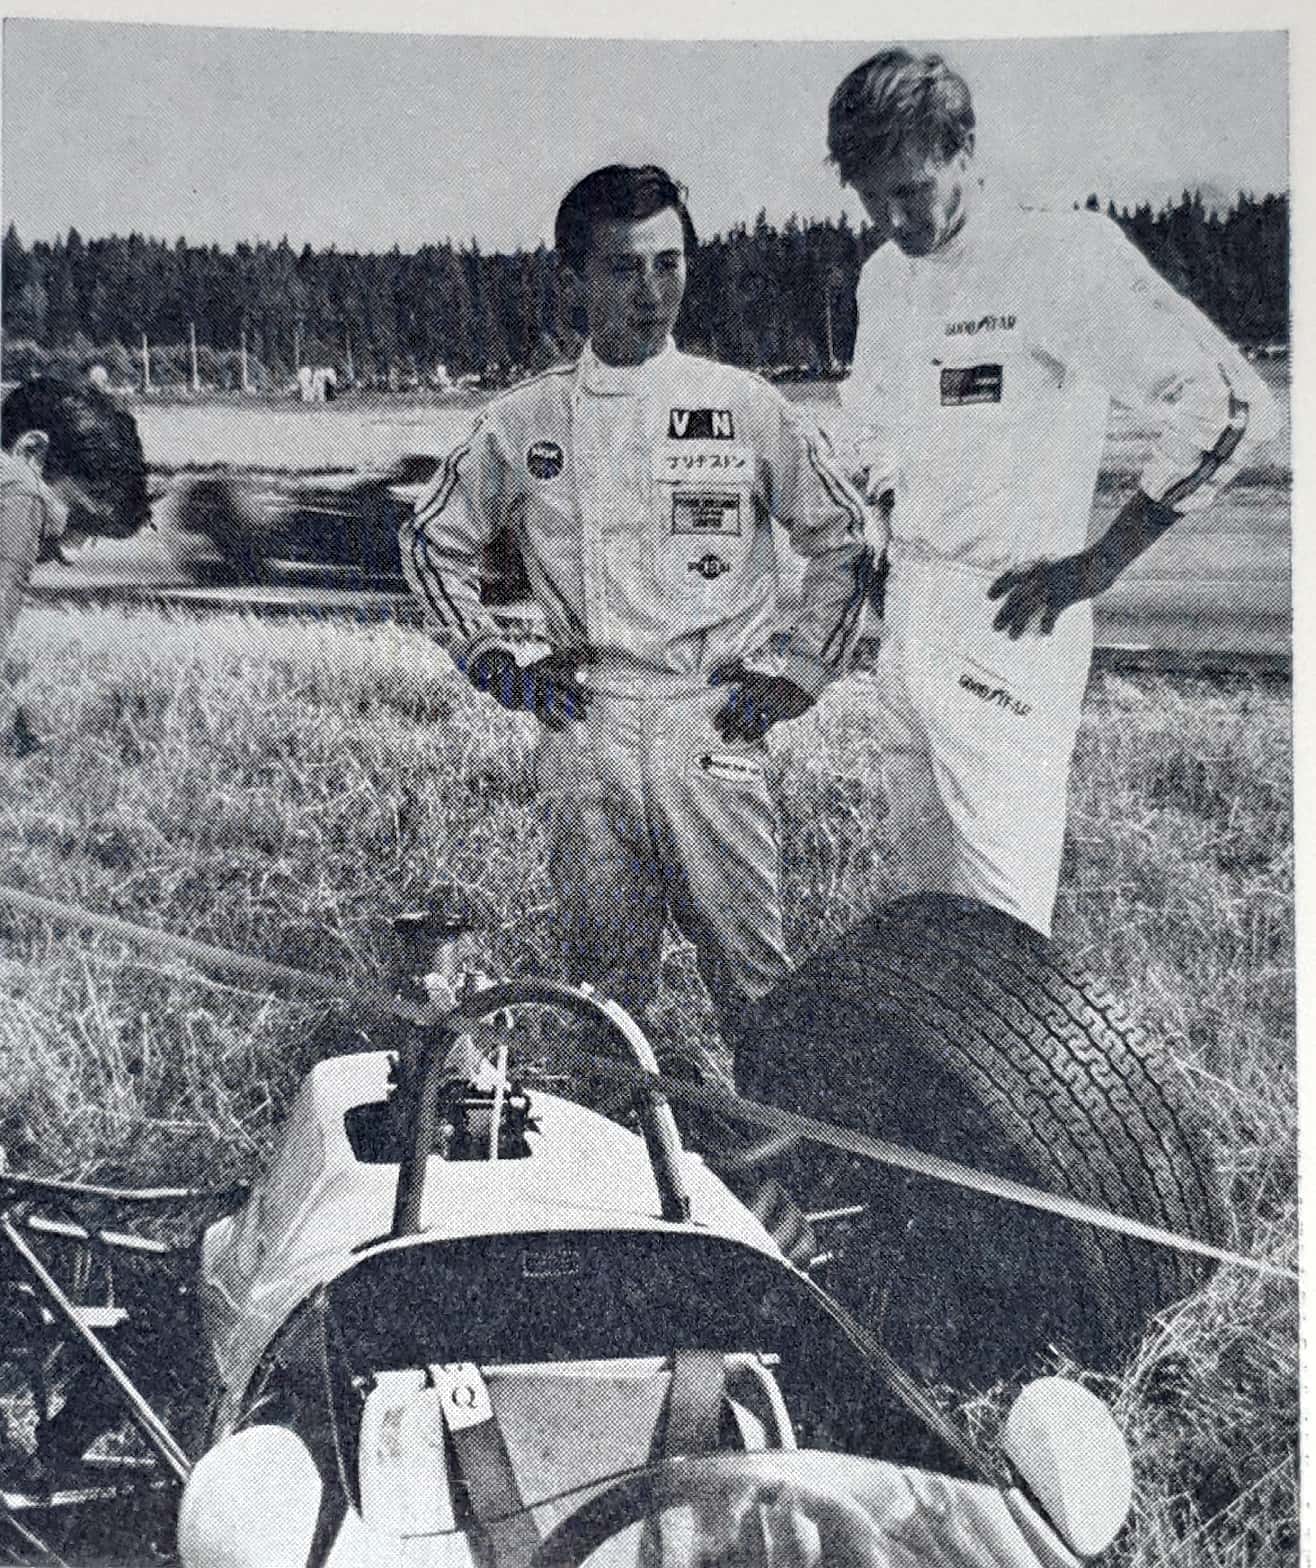 Ronnie and Ikuzawa at the Kanonloppet in 1968.